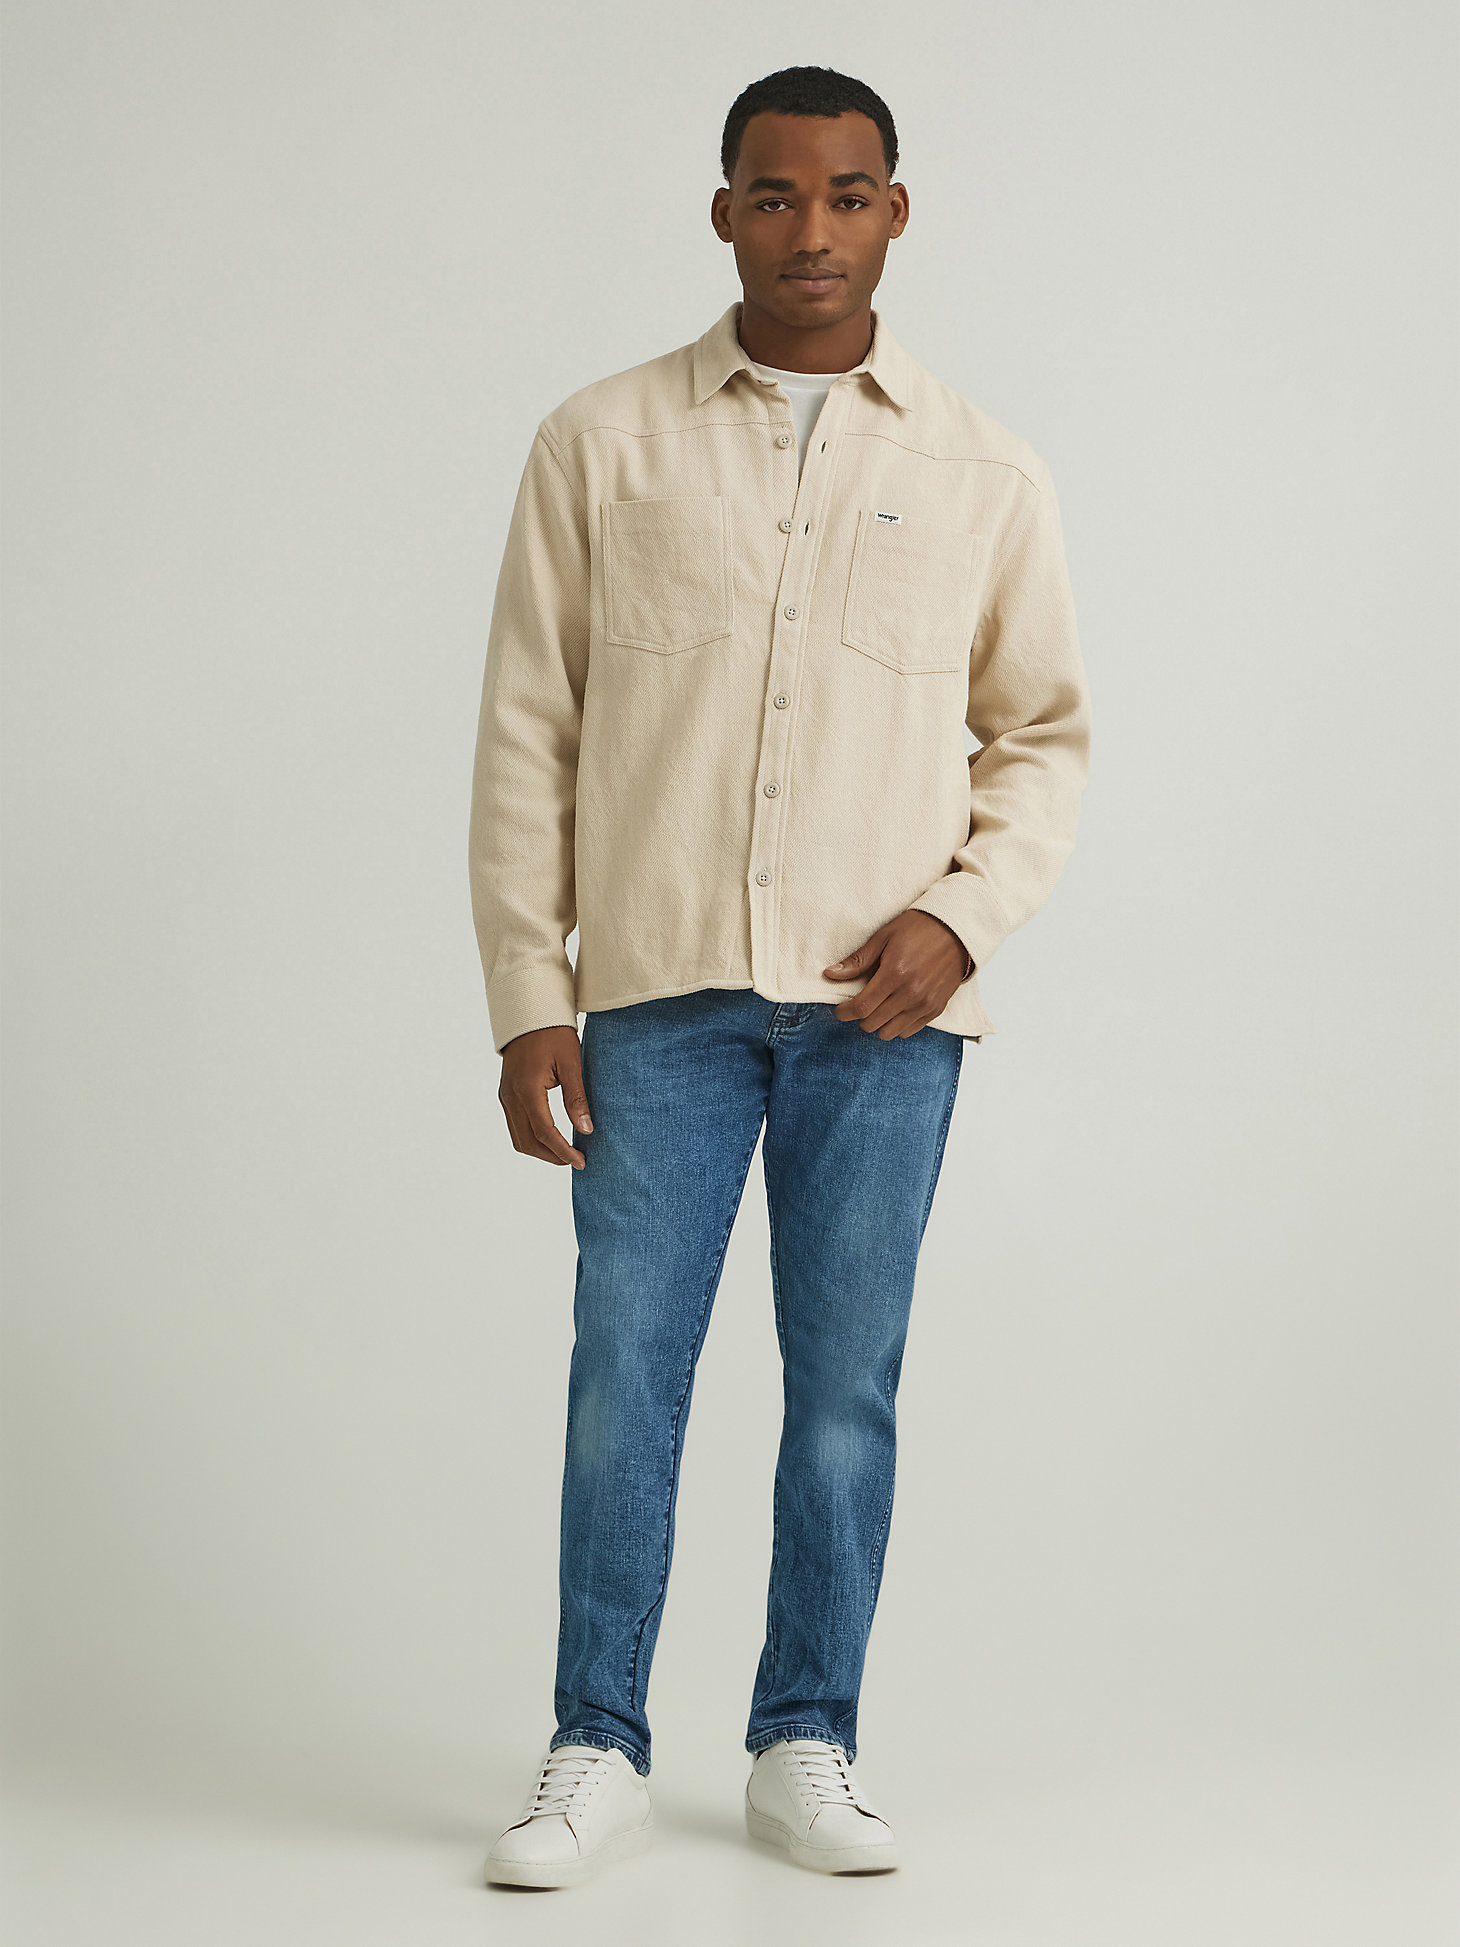 Men's Twill Overshirt in Oatmeal alternative view 1